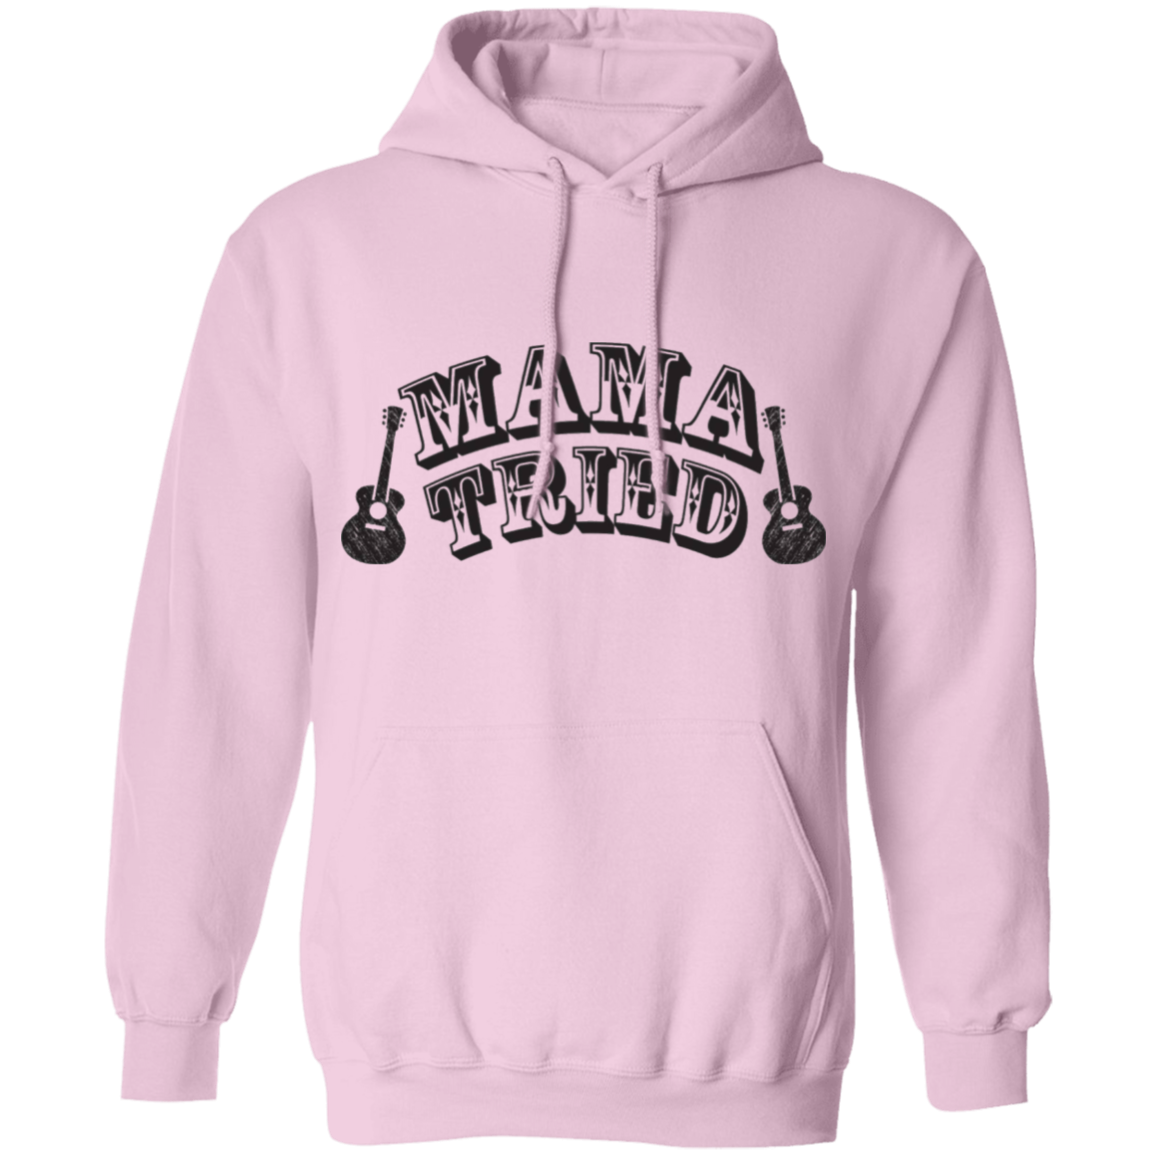 Mama tried Pullover Hoodie